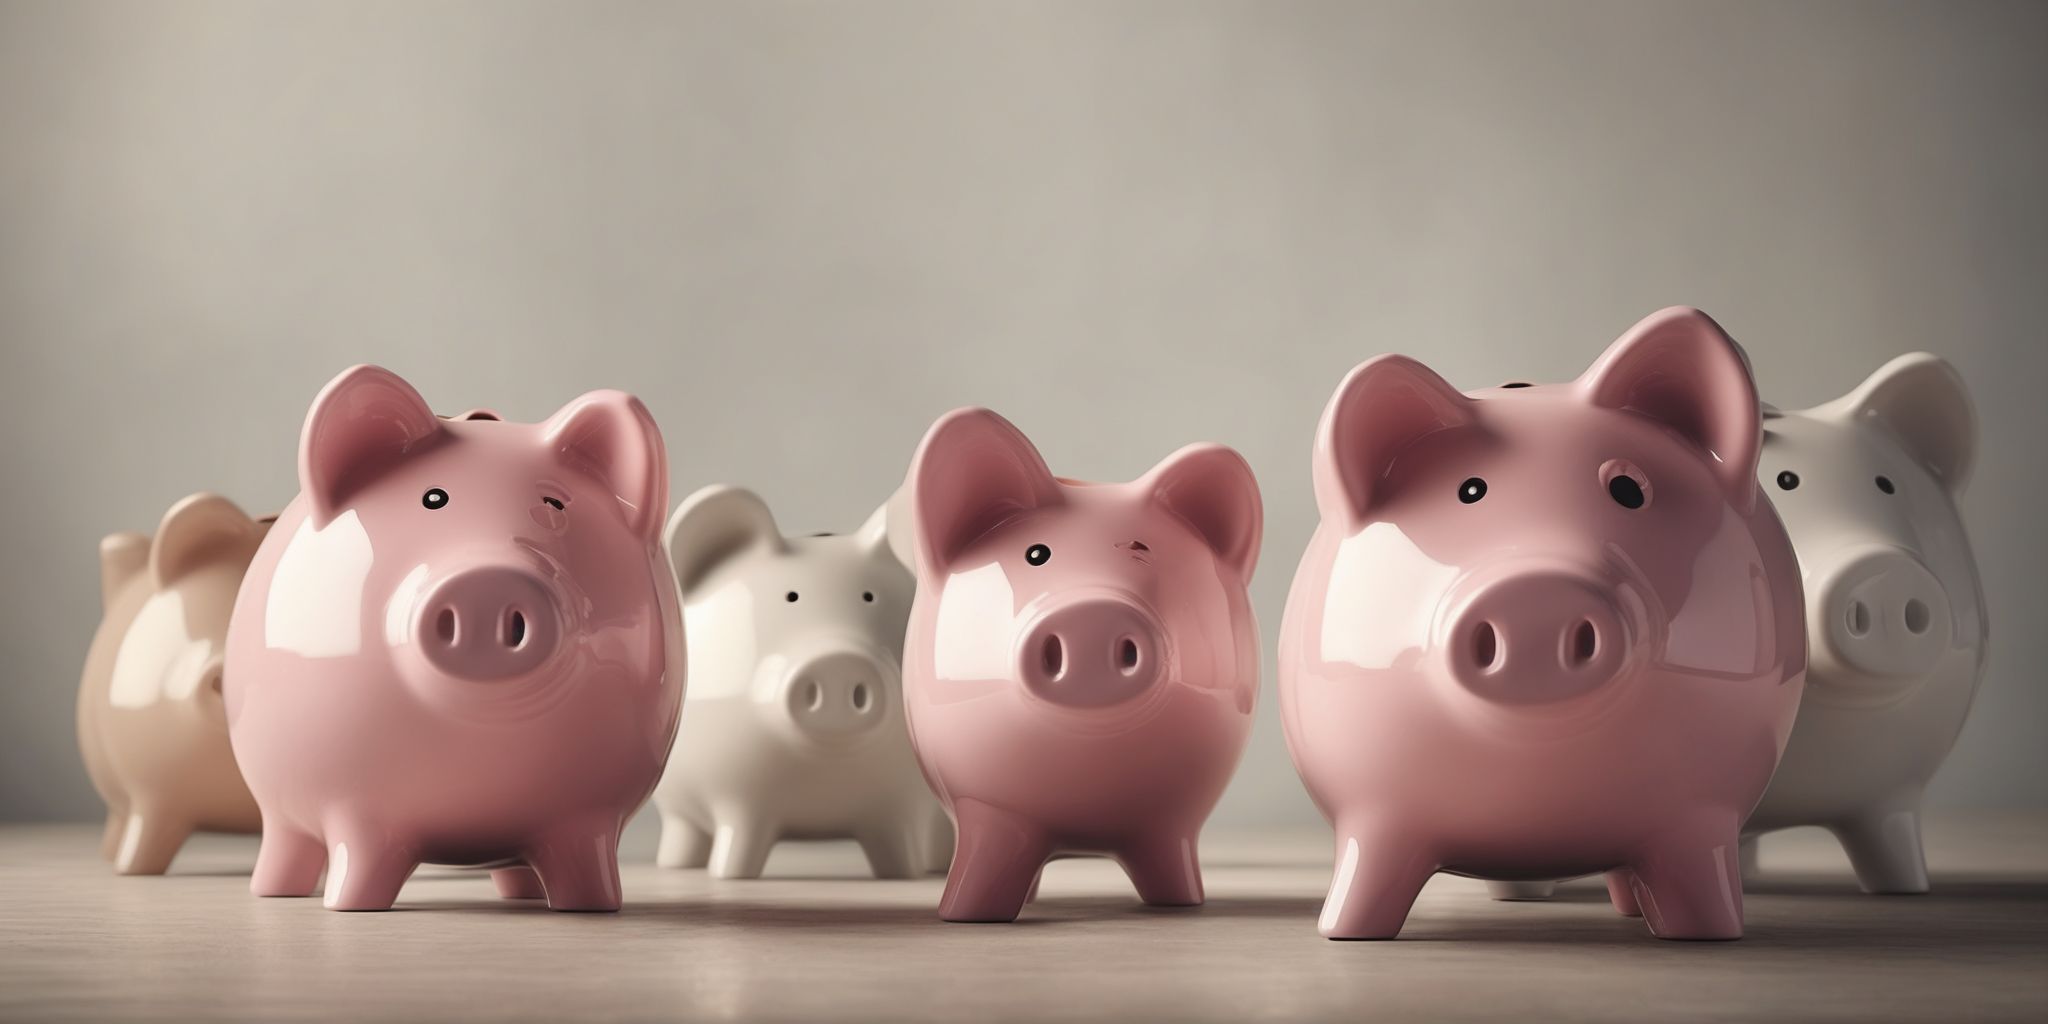 Piggy banks  in realistic, photographic style